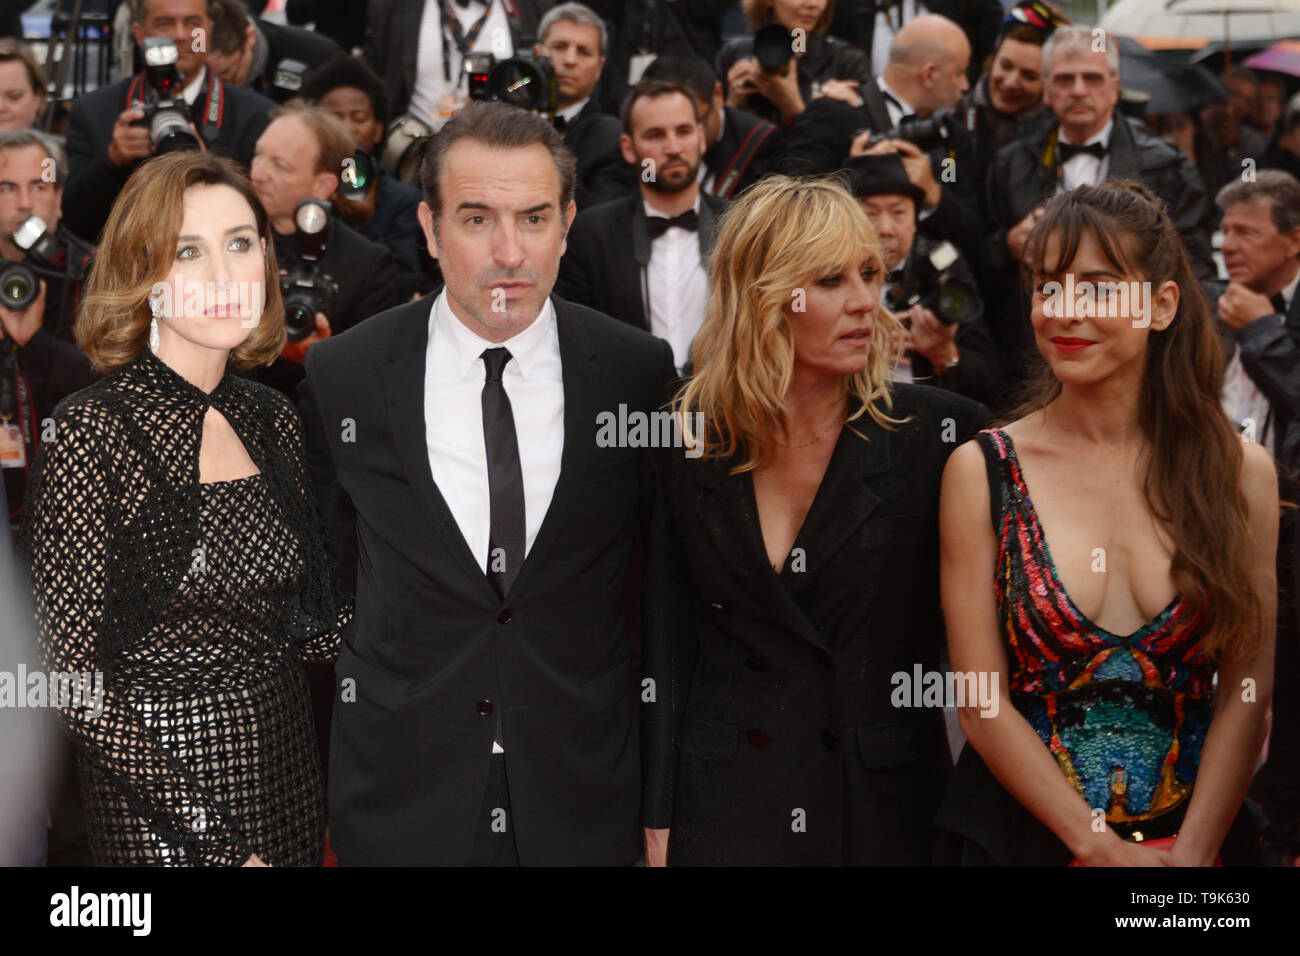 May 18, 2019 - Cannes, France - CANNES, FRANCE - MAY 18: (L-R) Audrey Dana, a guest, Jean Dujardin, Christophe Lambert, Elsa Zilberstein, Gerard Darmon and Mathilde Seignier attend the screening of ''Les Plus Belles Annees D'Une Vie'' during the 72nd annual Cannes Film Festival on May 18, 2019 in Cannes, France. (Credit Image: © Frederick InjimbertZUMA Wire) Stock Photo